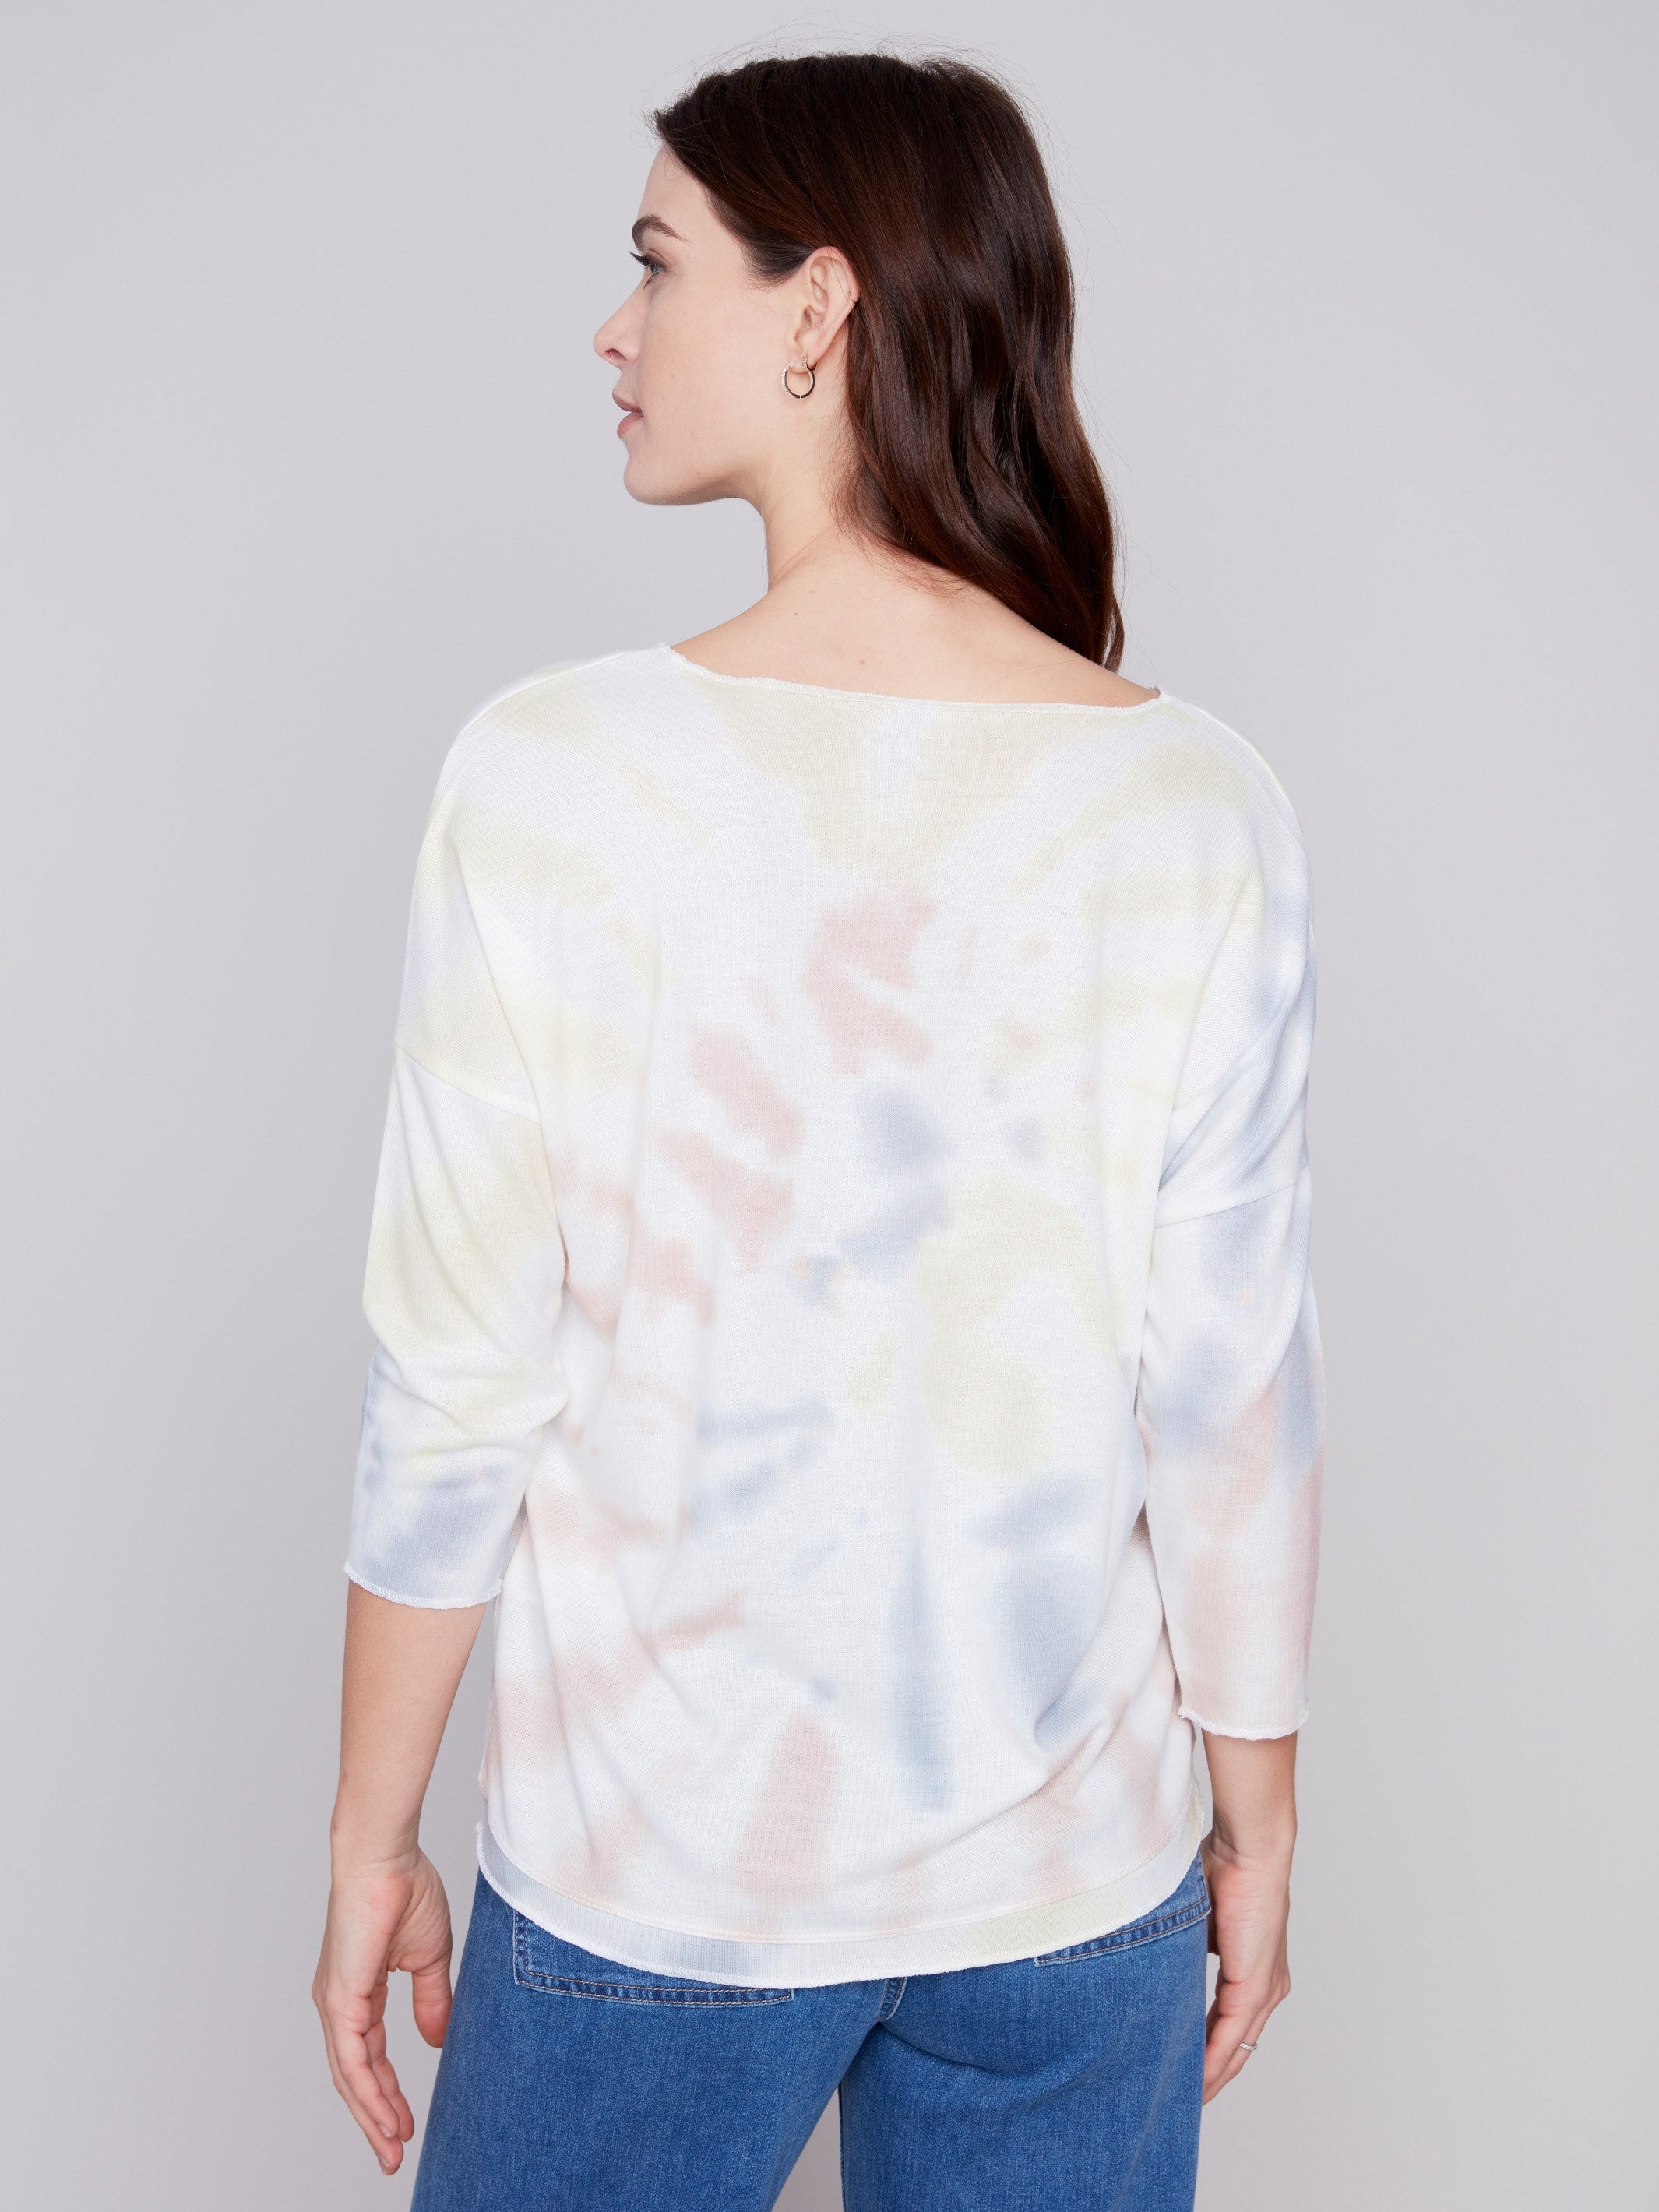 Tie Dye V-Neck Knit Top - Tulip - Charlie B Collection Canada - Image 2